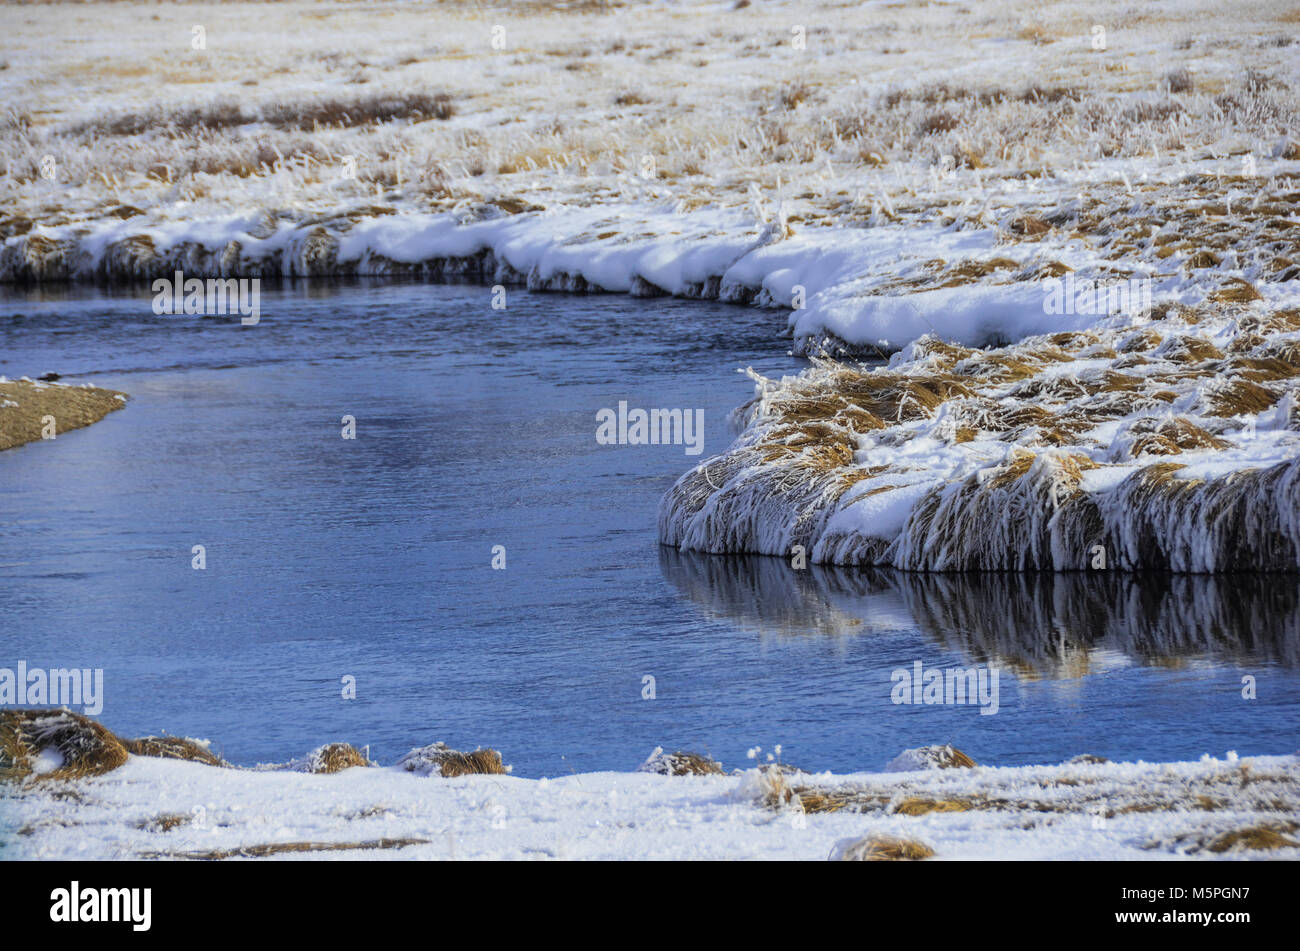 A lazy riverbend provides much-needed water to an Elk refuge in Driggs, Idaho. The grass on the riverbed lays flat with the heaviness of snow. Stock Photo